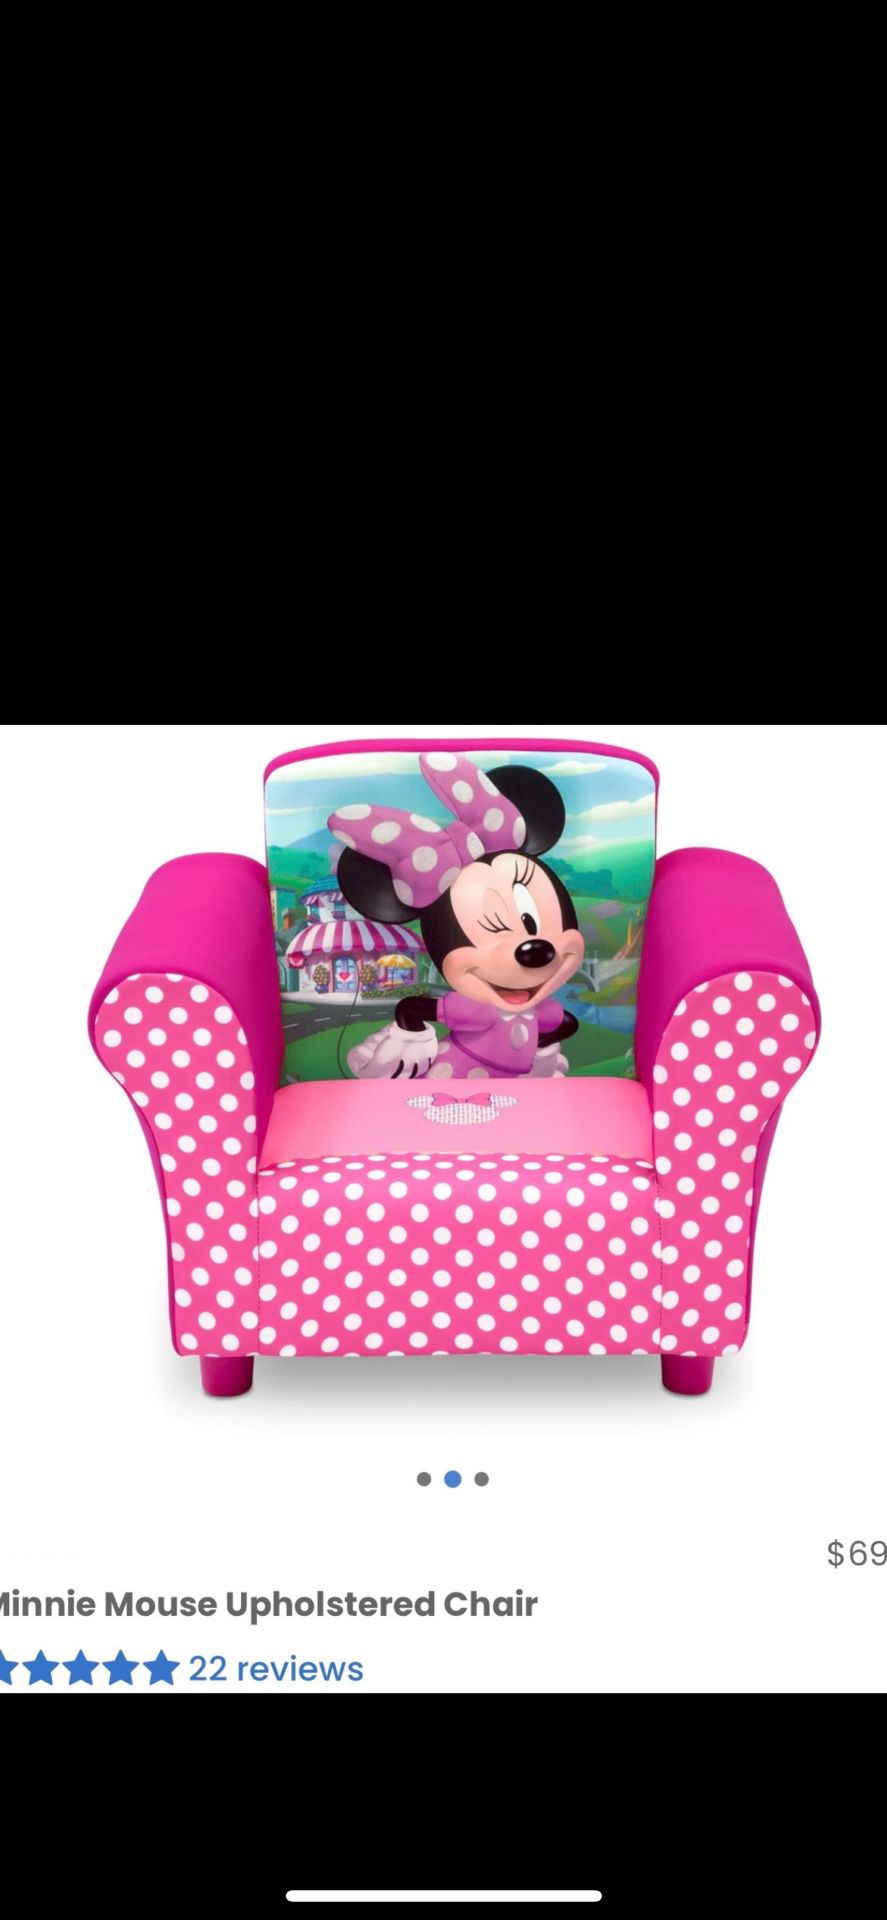 Minnie Mouse Upholstered Chair/ Minnie Mouse/ Disney/ Kids/ Toys/ Chair/ Furniture/ New